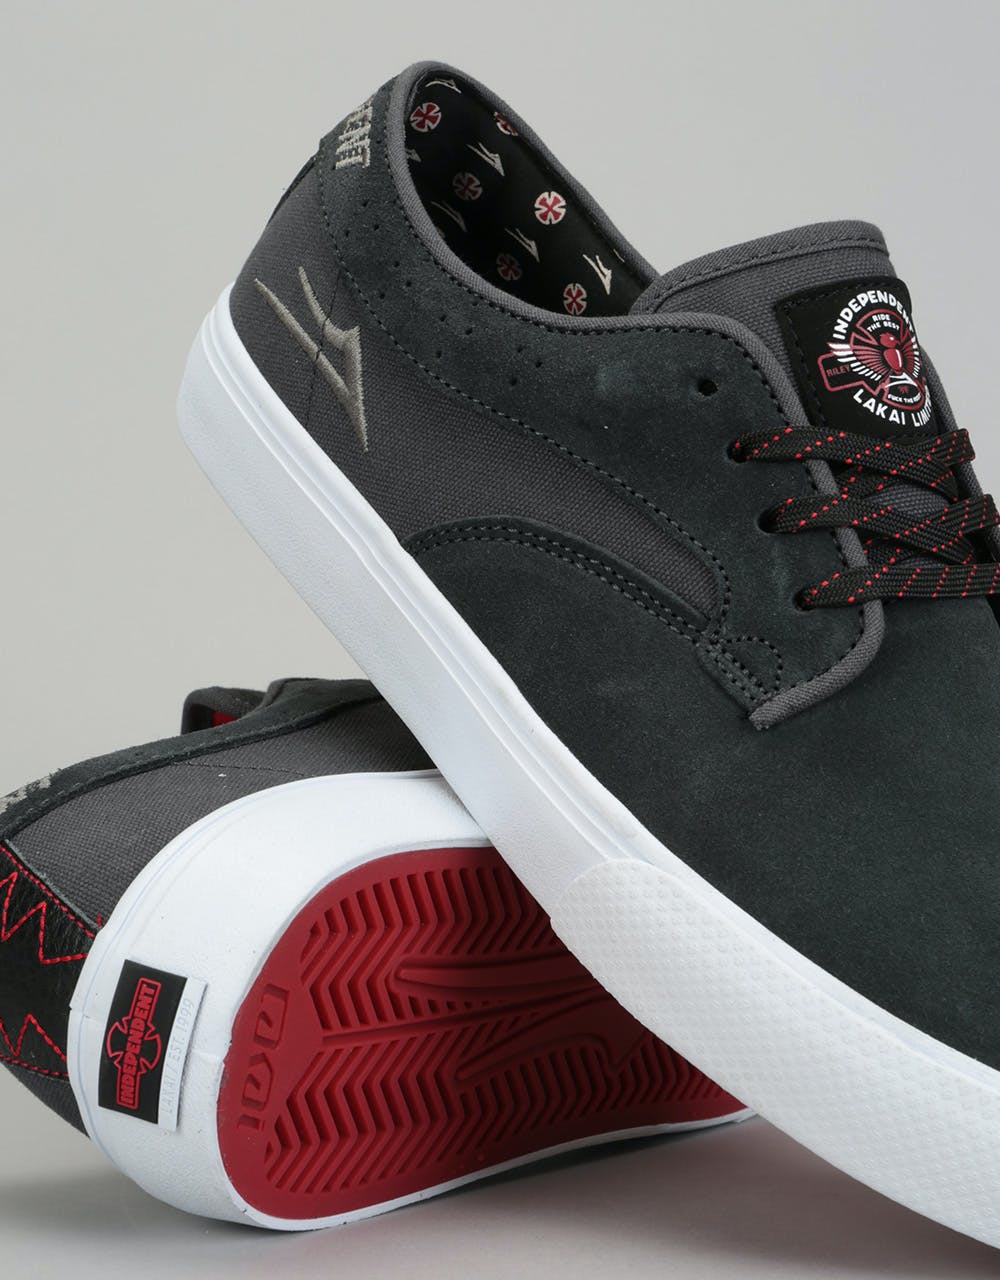 Lakai x Independent Riley Hawk Skate Shoes - Charcoal Suede